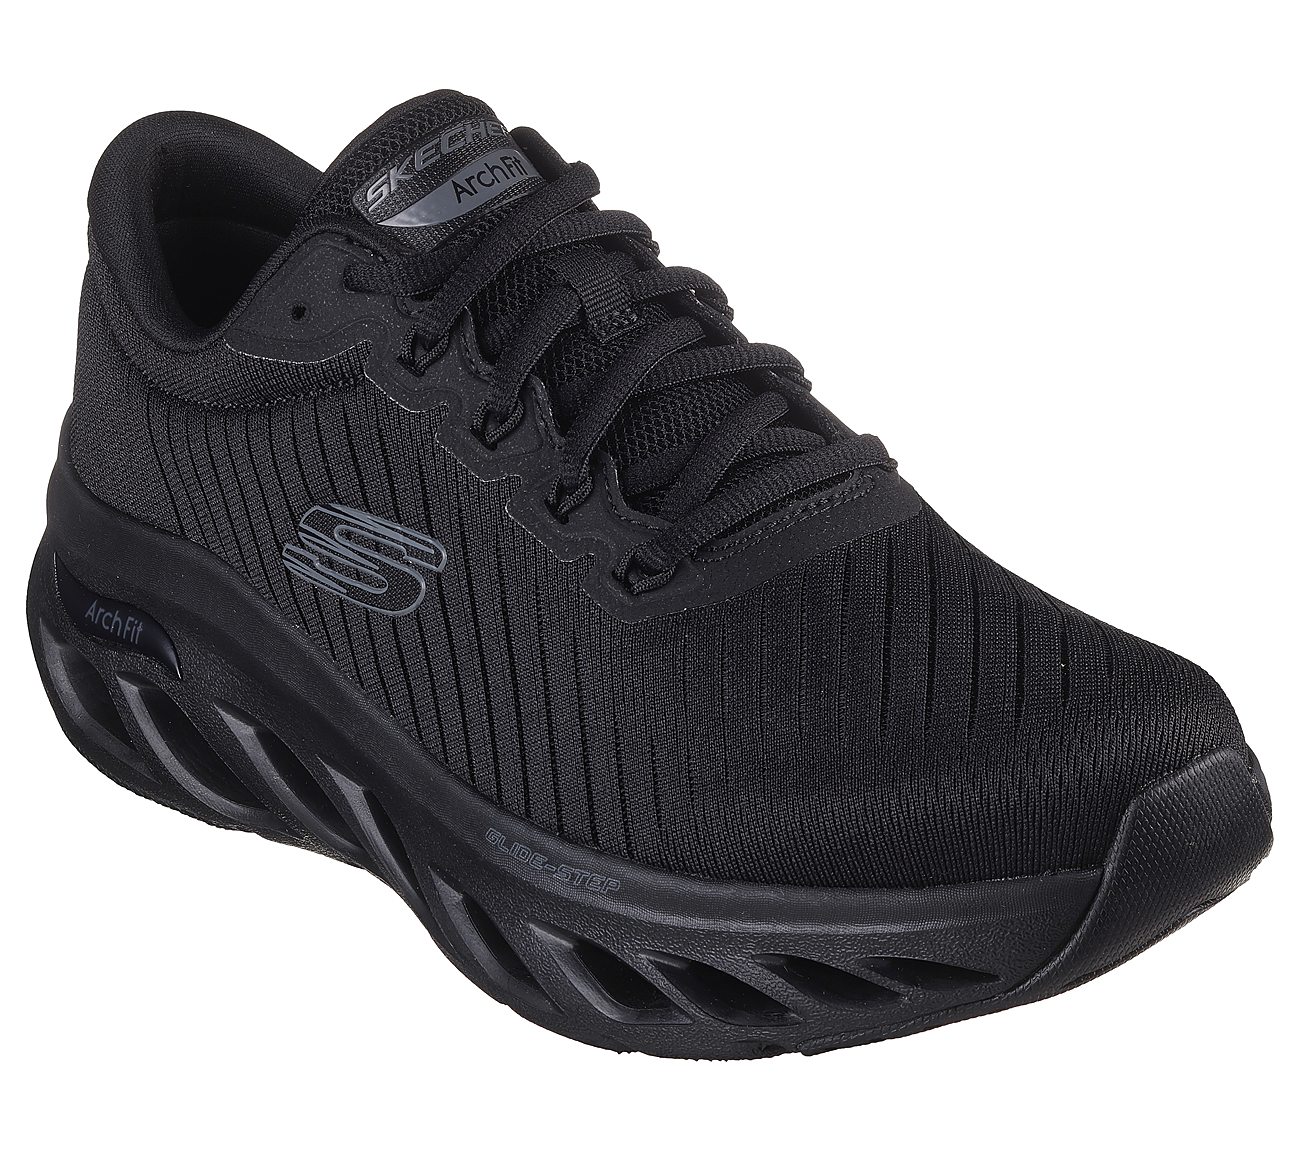 ARCH FIT GLIDE-STEP - KRONOS, BBLACK Footwear Right View